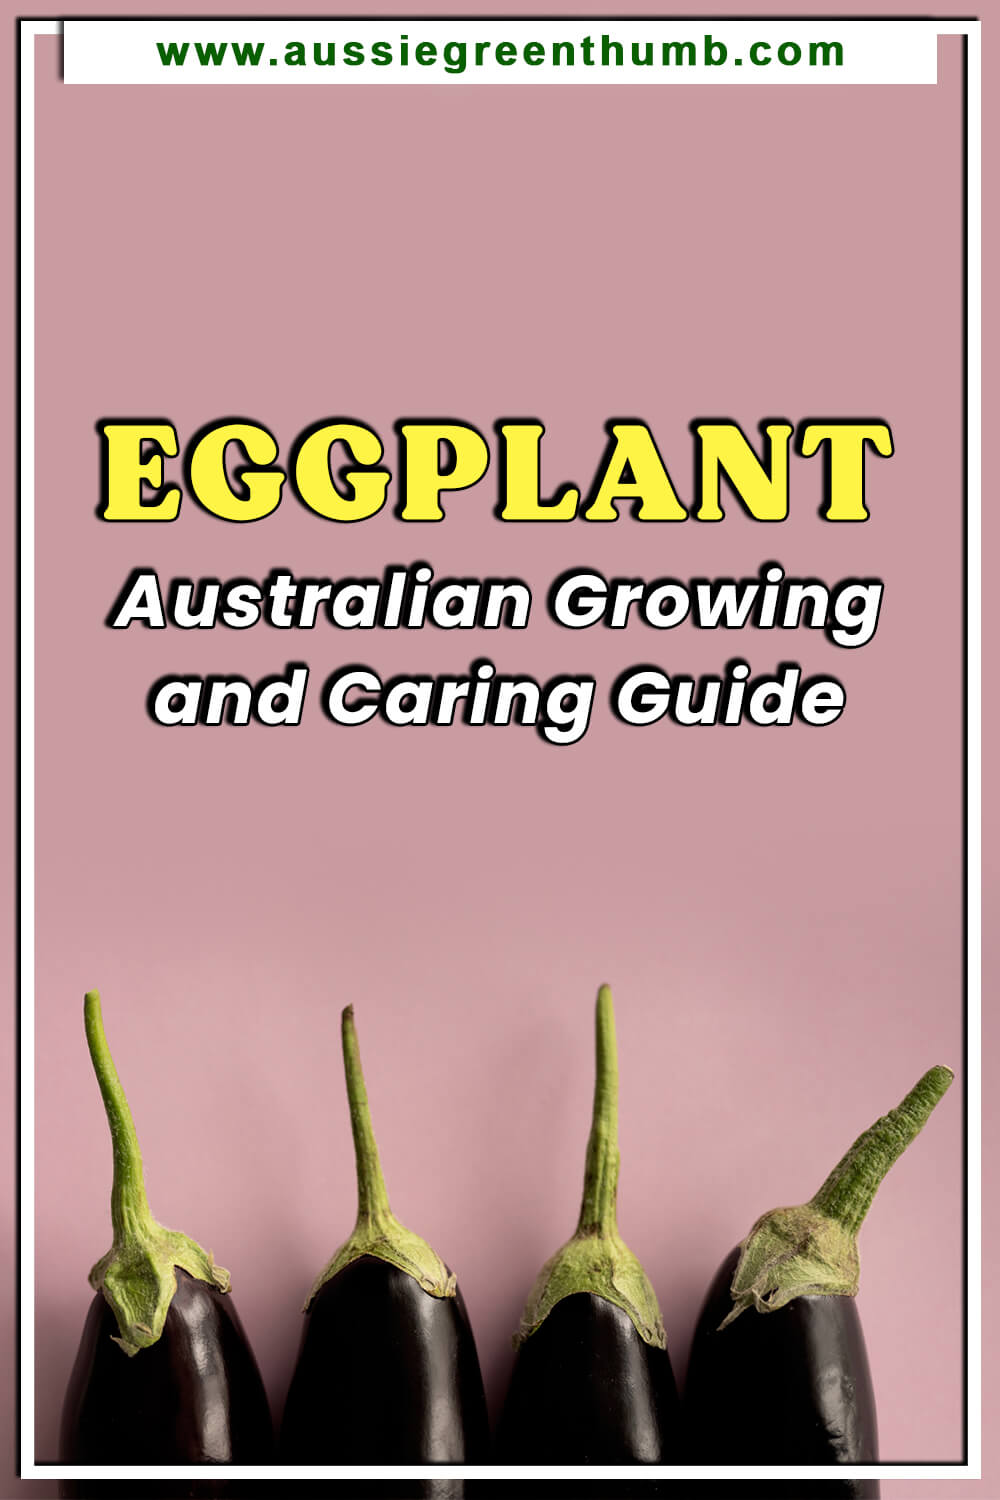 Eggplant – Australian Growing and Caring Guide